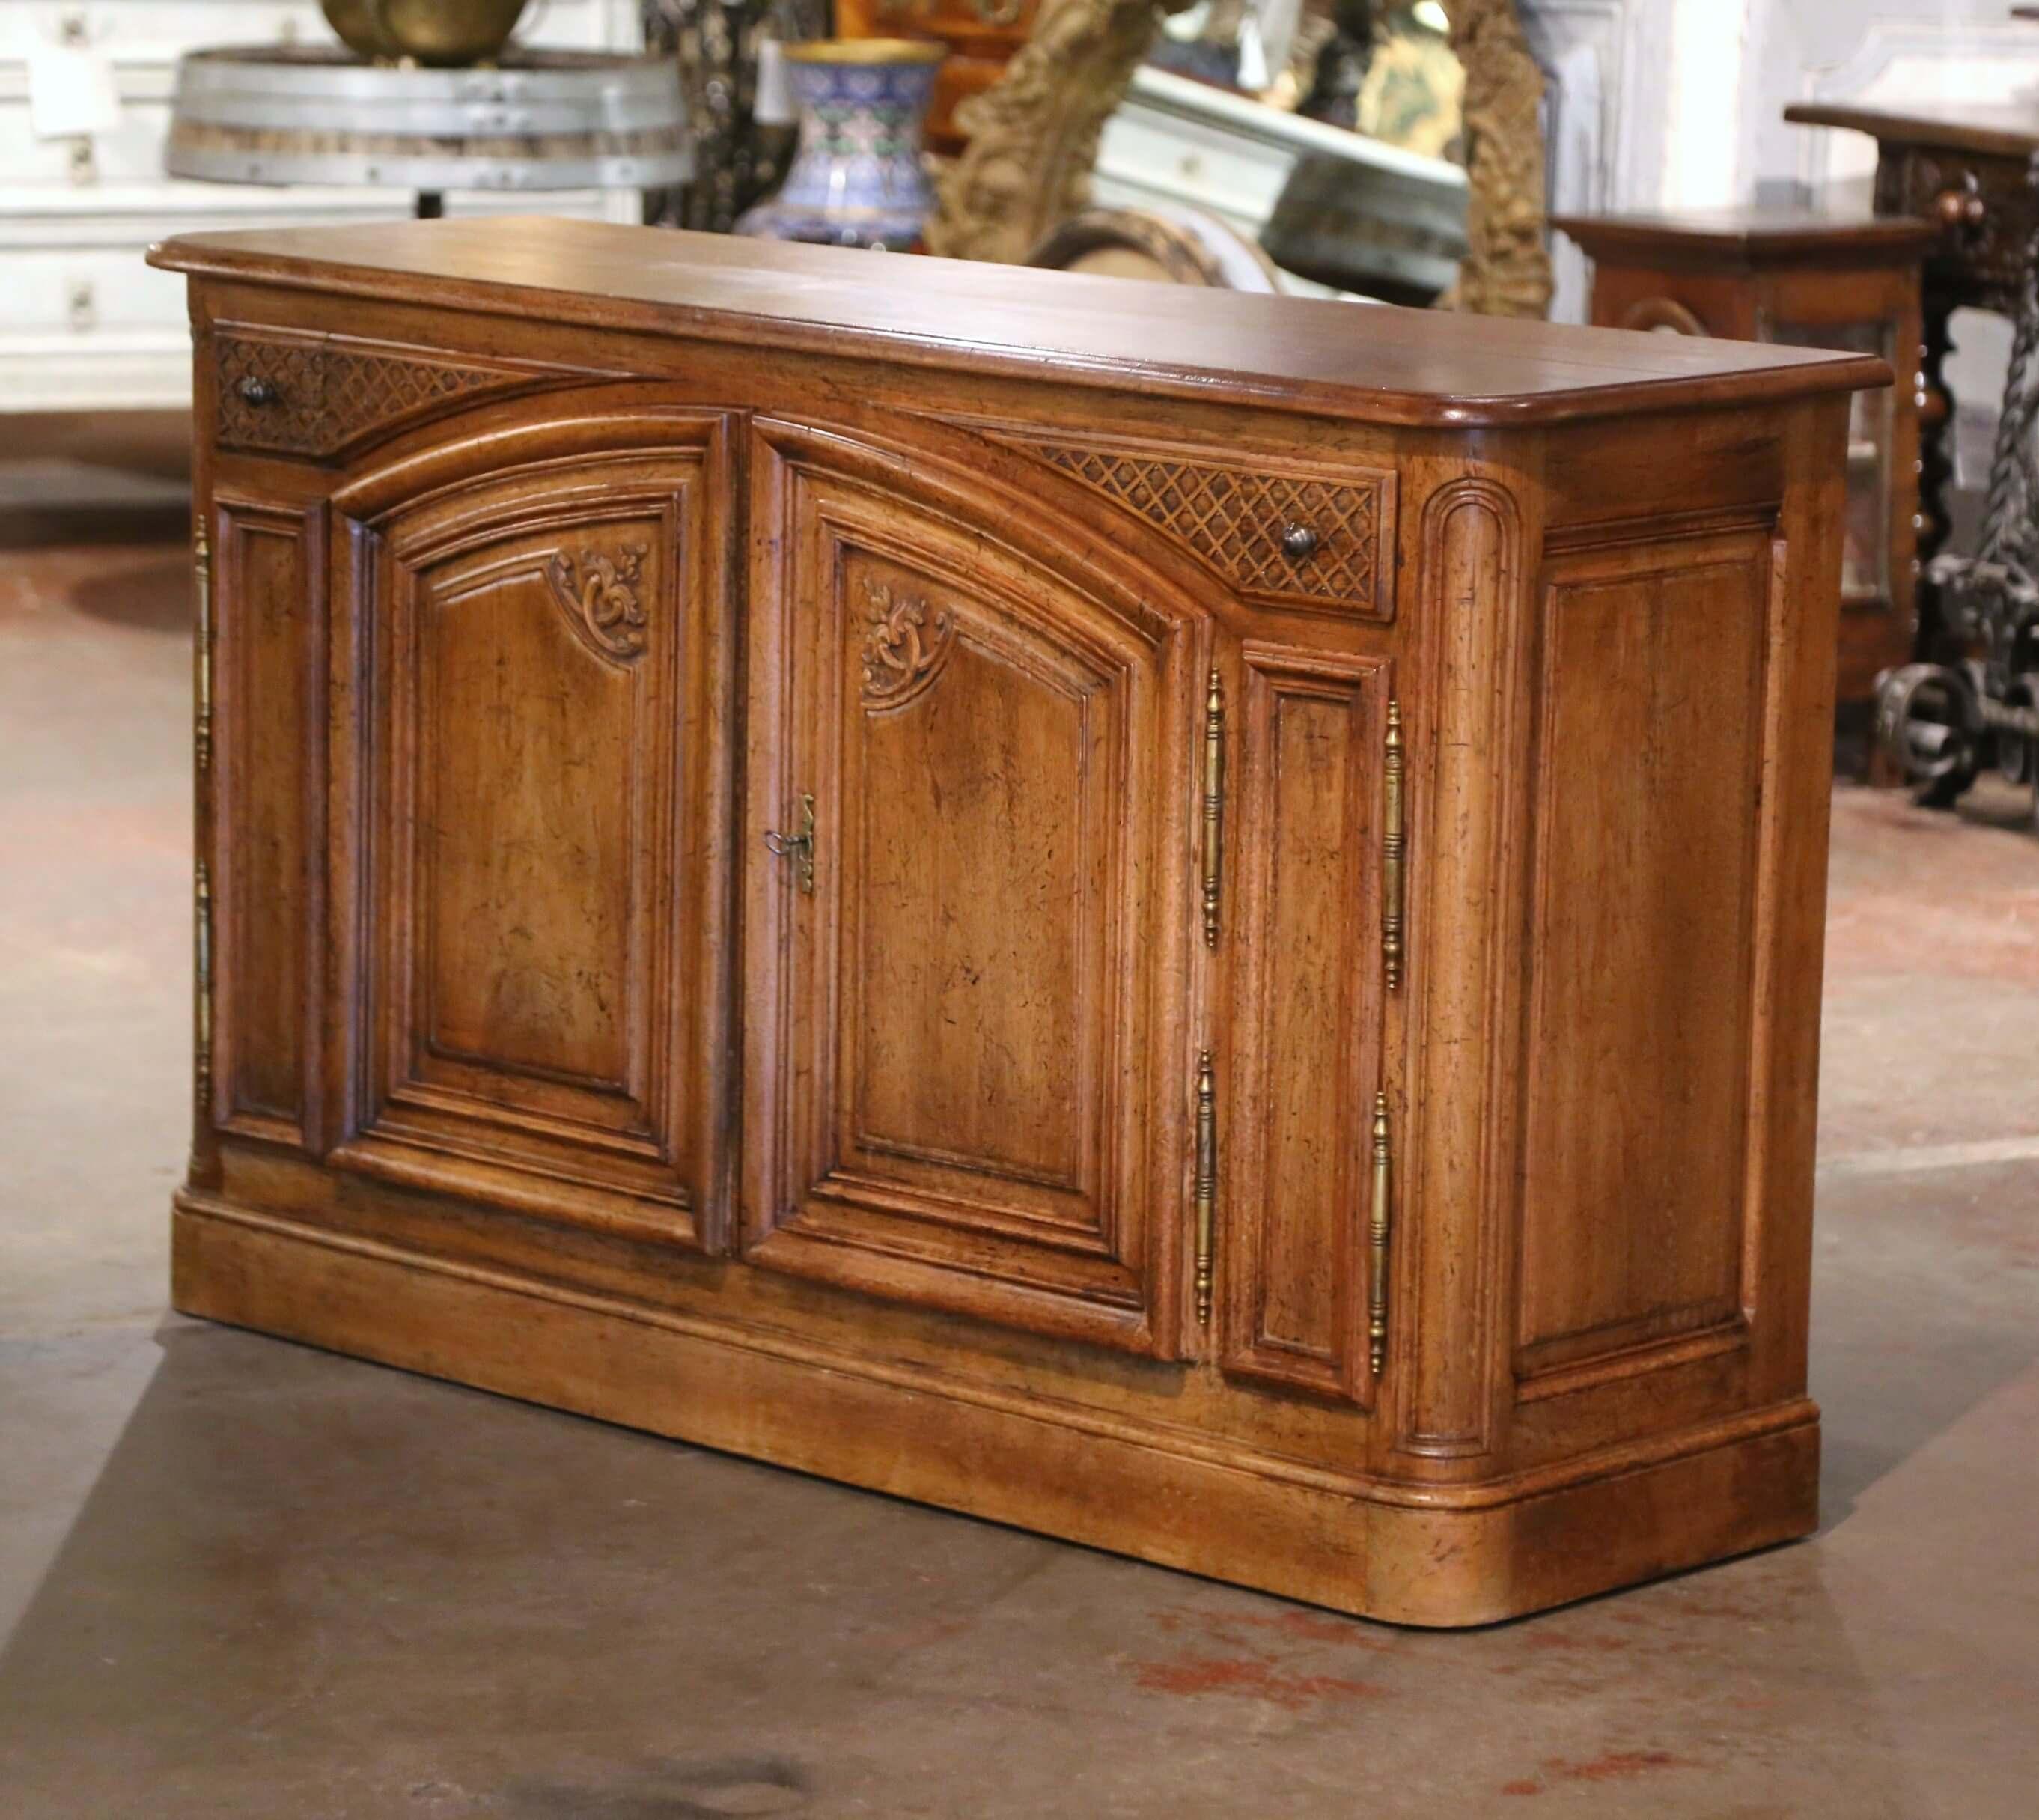 Decorate an entry or a living room with this elegant buffet. Crafted in France circa 1970, and built of walnut, the cabinet stands on a thick plinth base. The piece features two arched paneled doors decorated with carved floral motifs in the